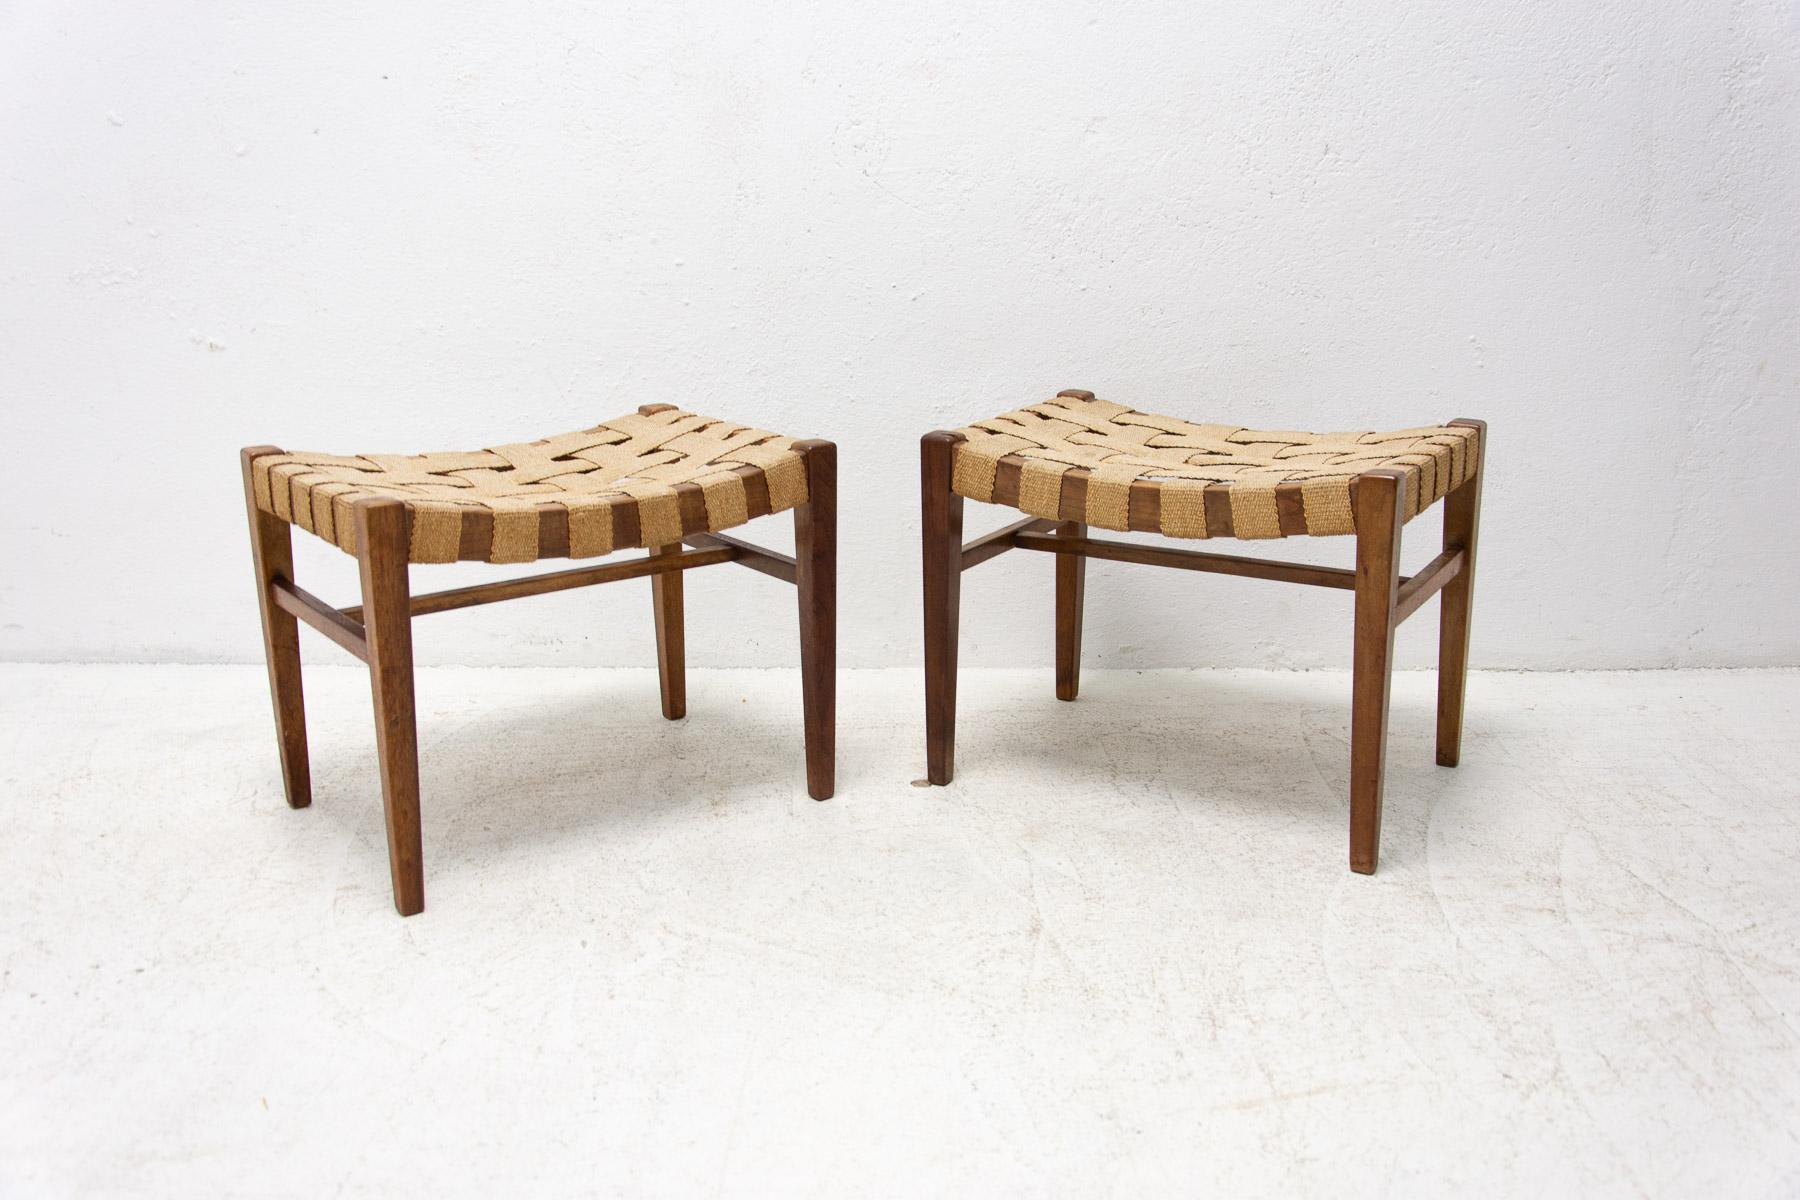 This Vintage stools/footrests were produced by Krásná Jizba company in the former Czechoslovakia in the in the 1960´s. They features an unconventional design, irregular shaping. It´s made of beech wood. Wood is in good Vintage condition, showing